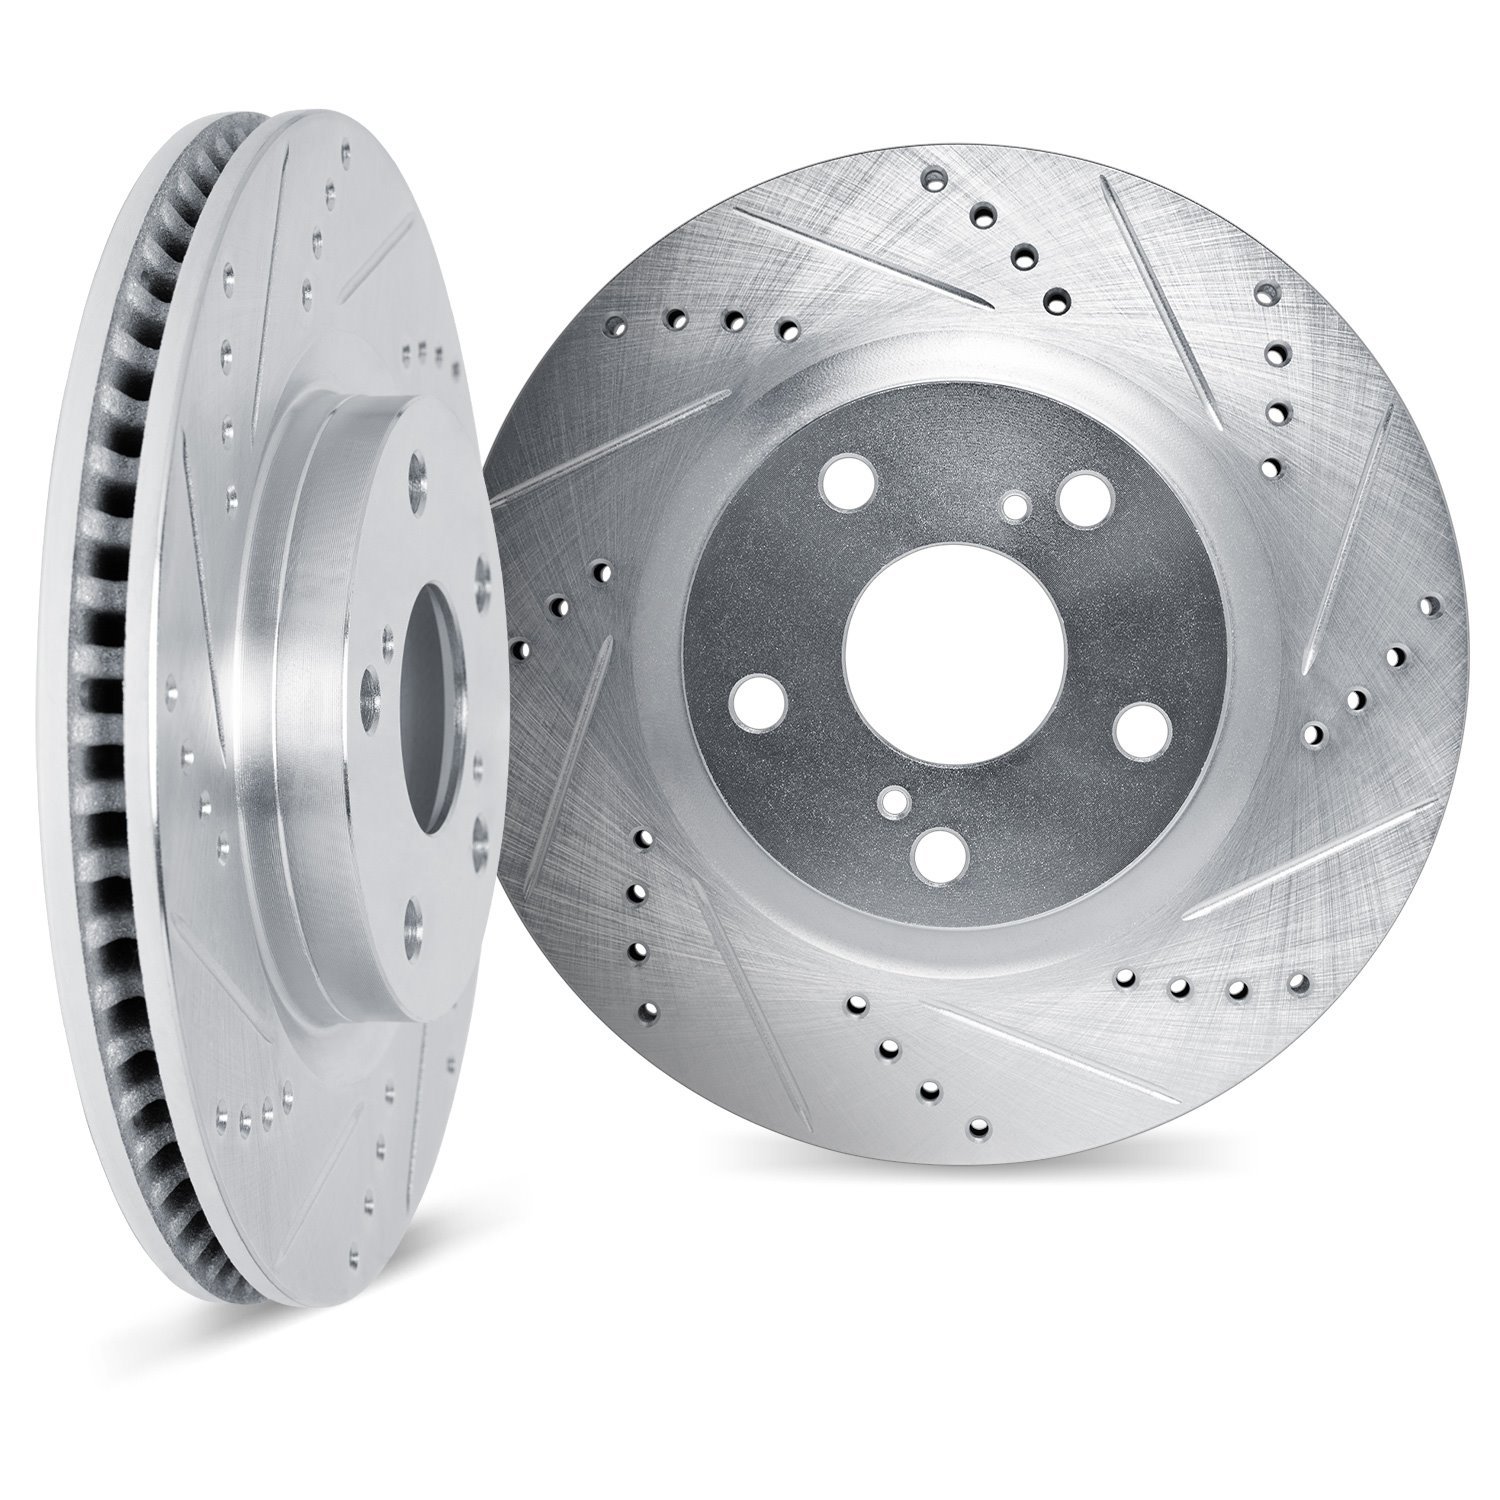 7002-76152 Drilled/Slotted Brake Rotors [Silver], Fits Select Lexus/Toyota/Scion, Position: Rear